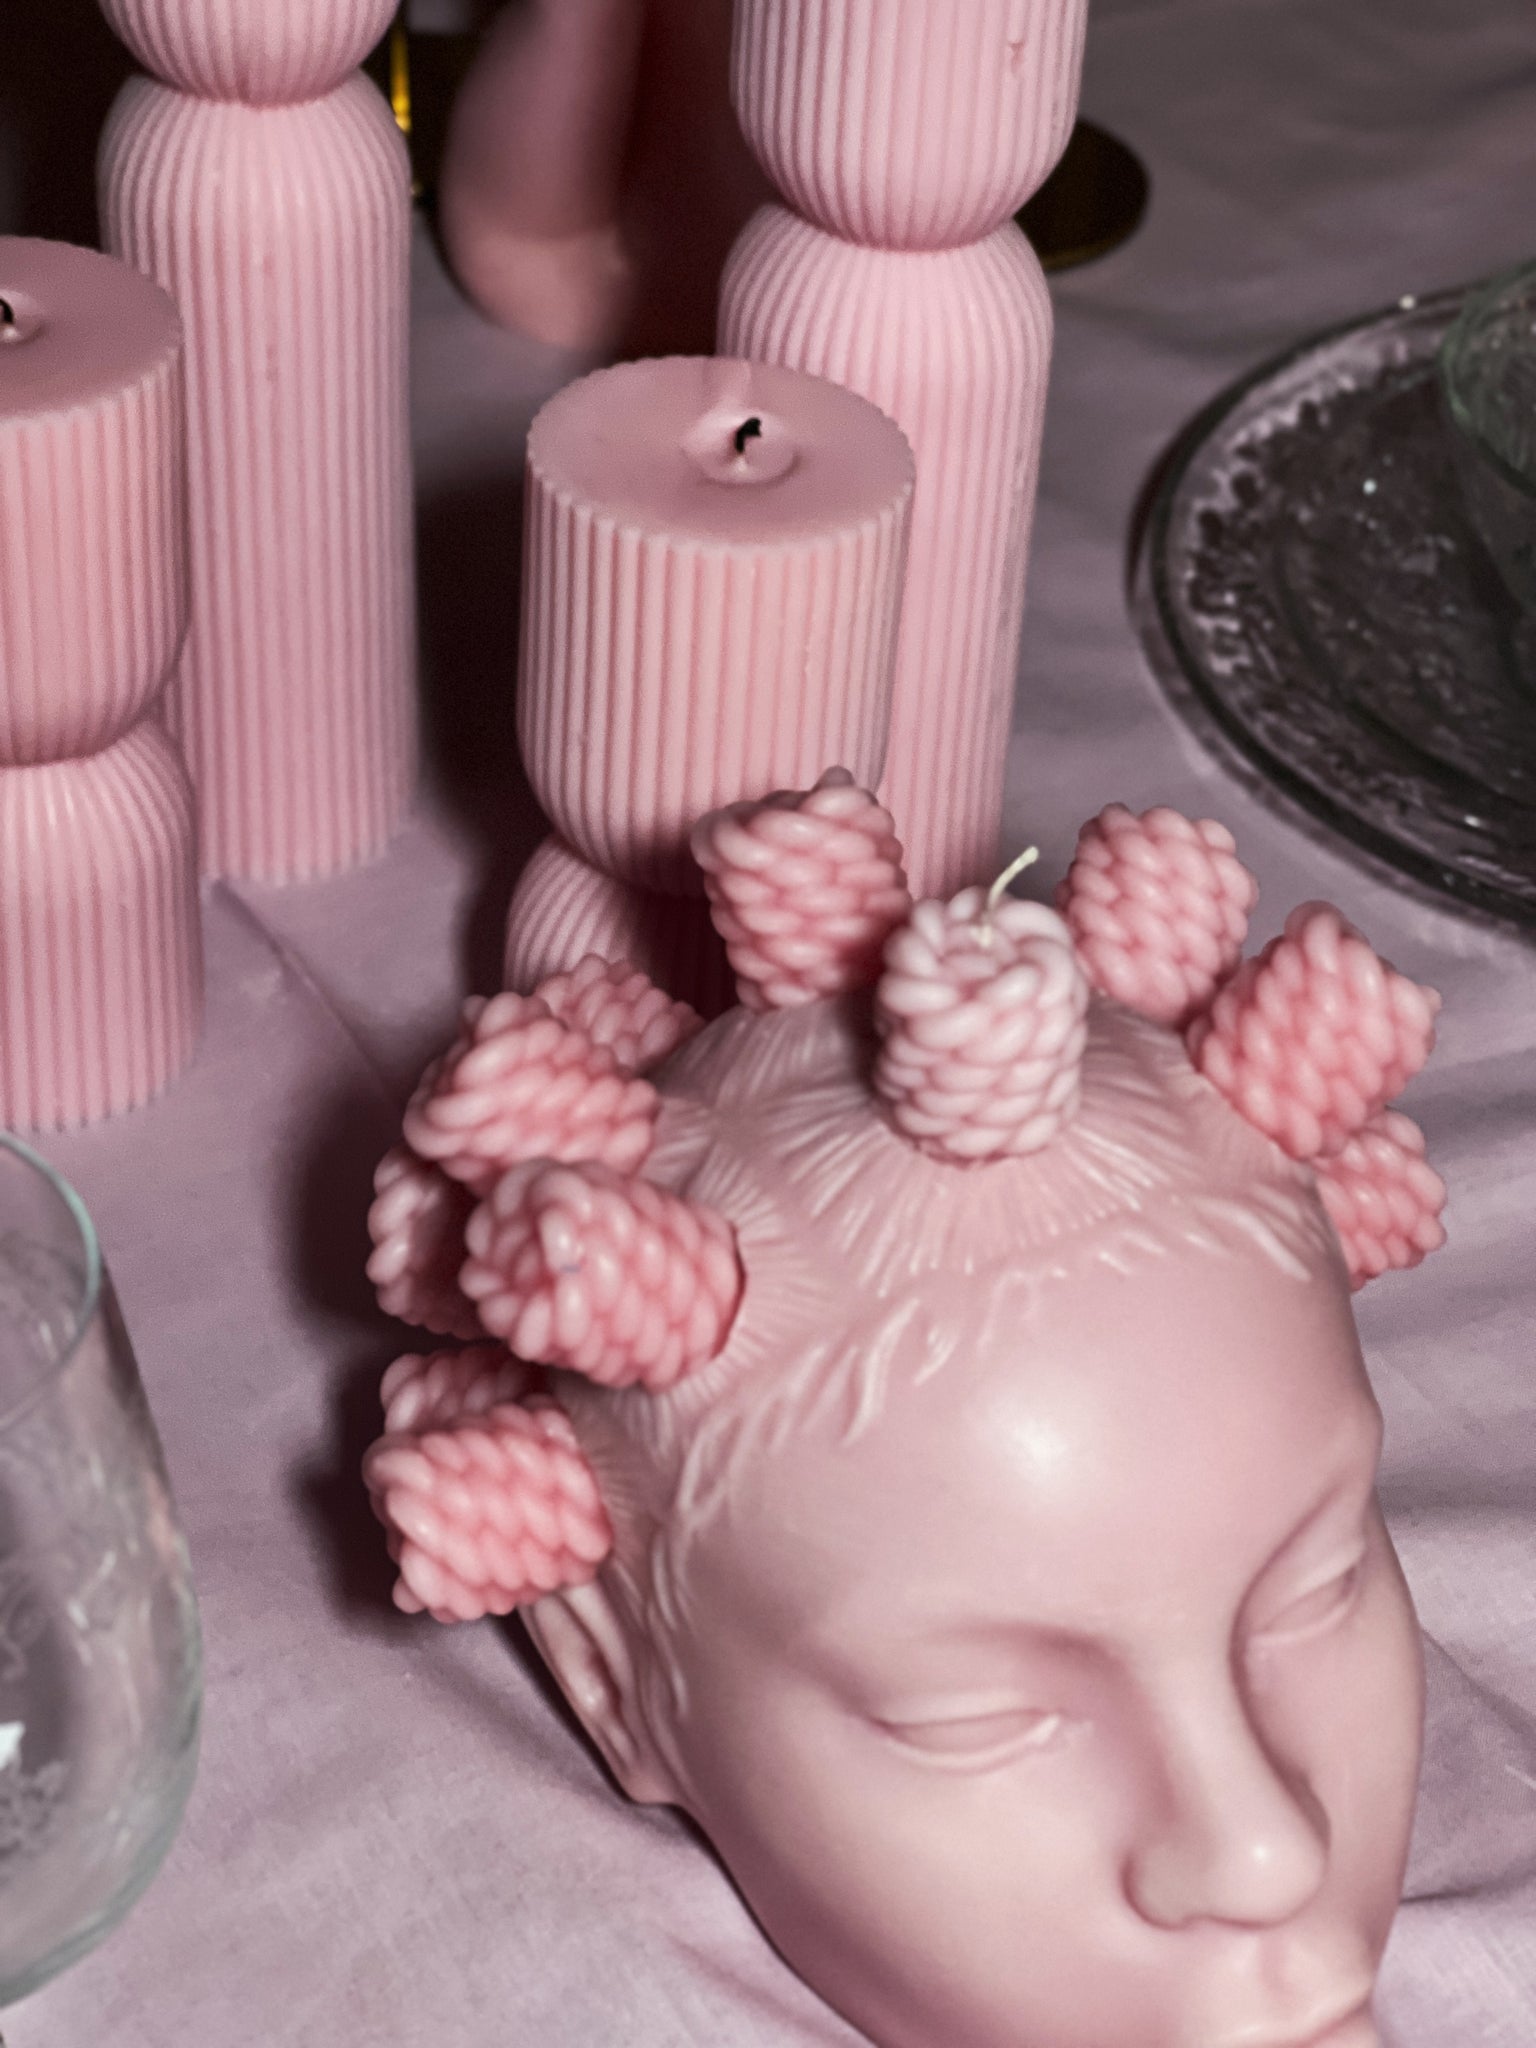 Crown Glory Bantu Knot Candle in Pink Kitty ™ (removable knots) - Secret Scents of Ella